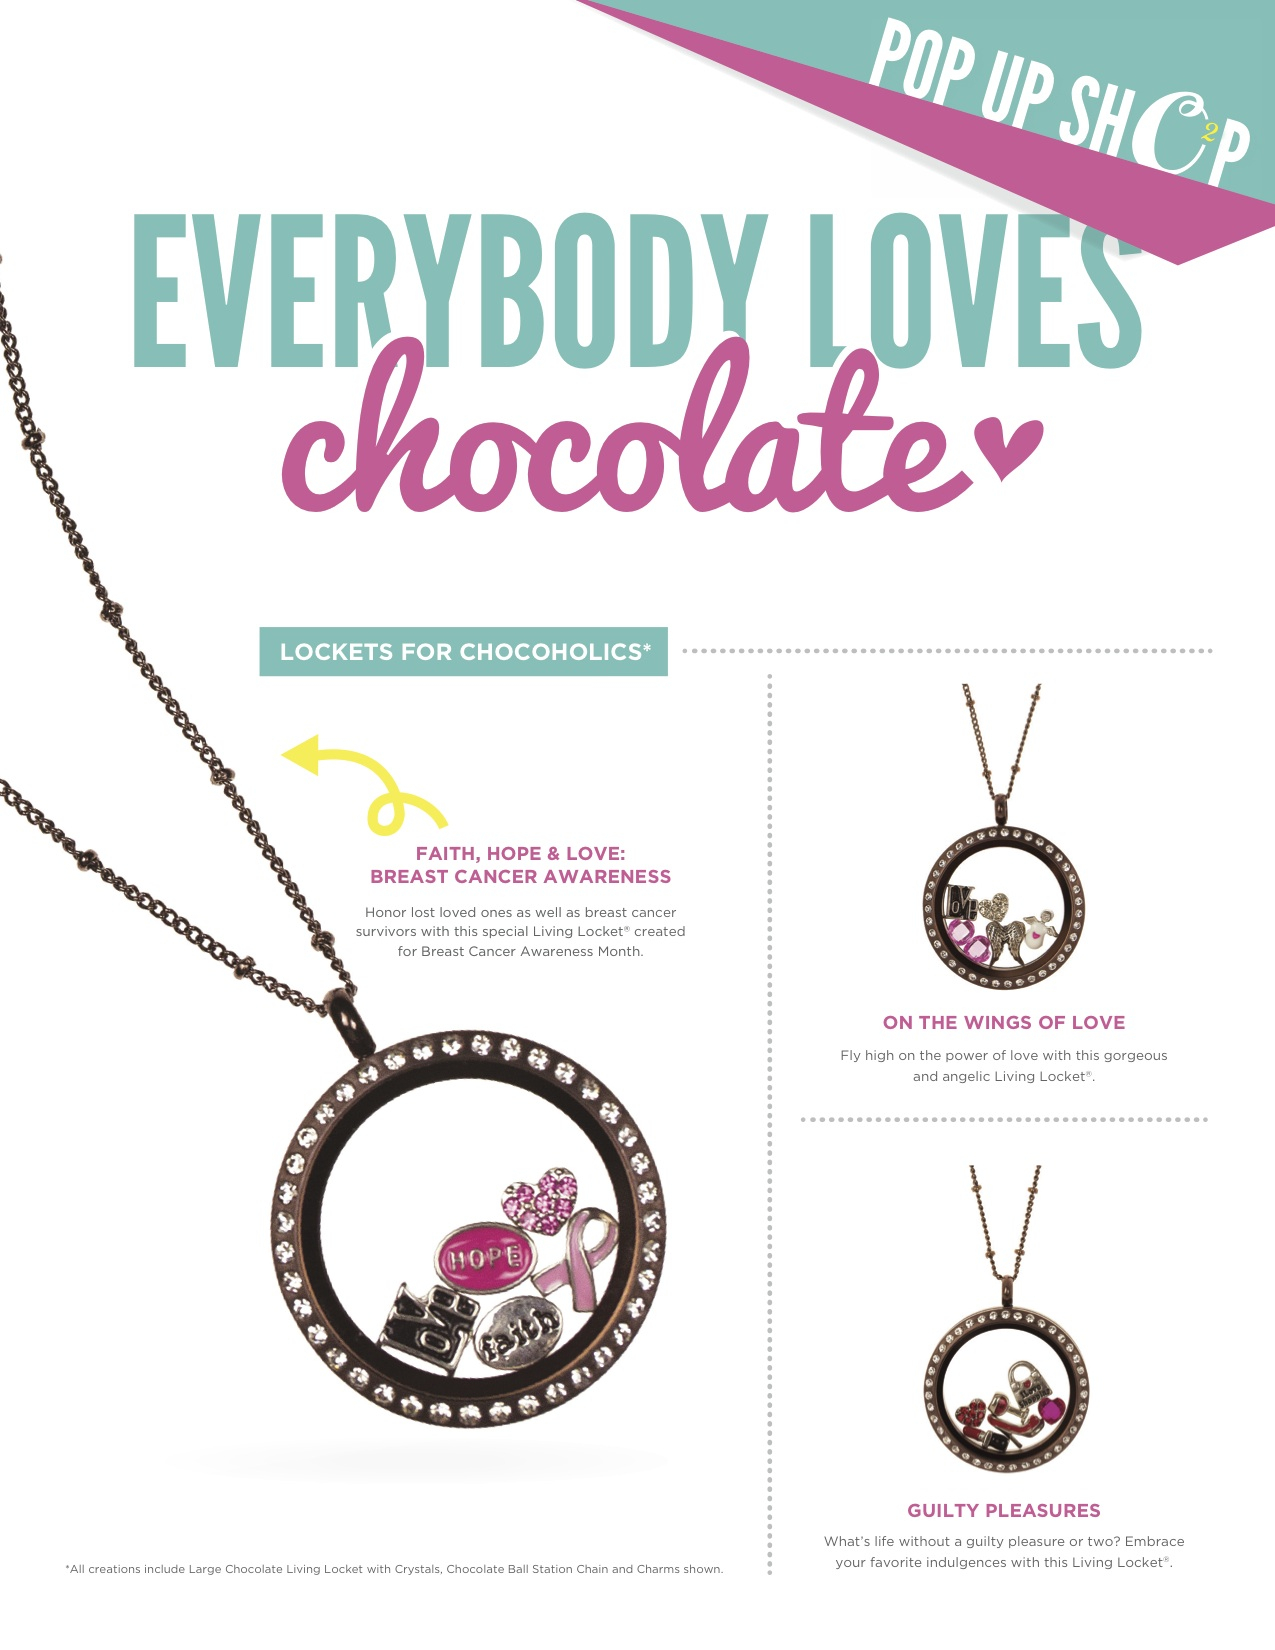 Origami Owl Ball Chain Everybody Loves Chocolate First Origami Owl 48 Hour Pop Up Shop